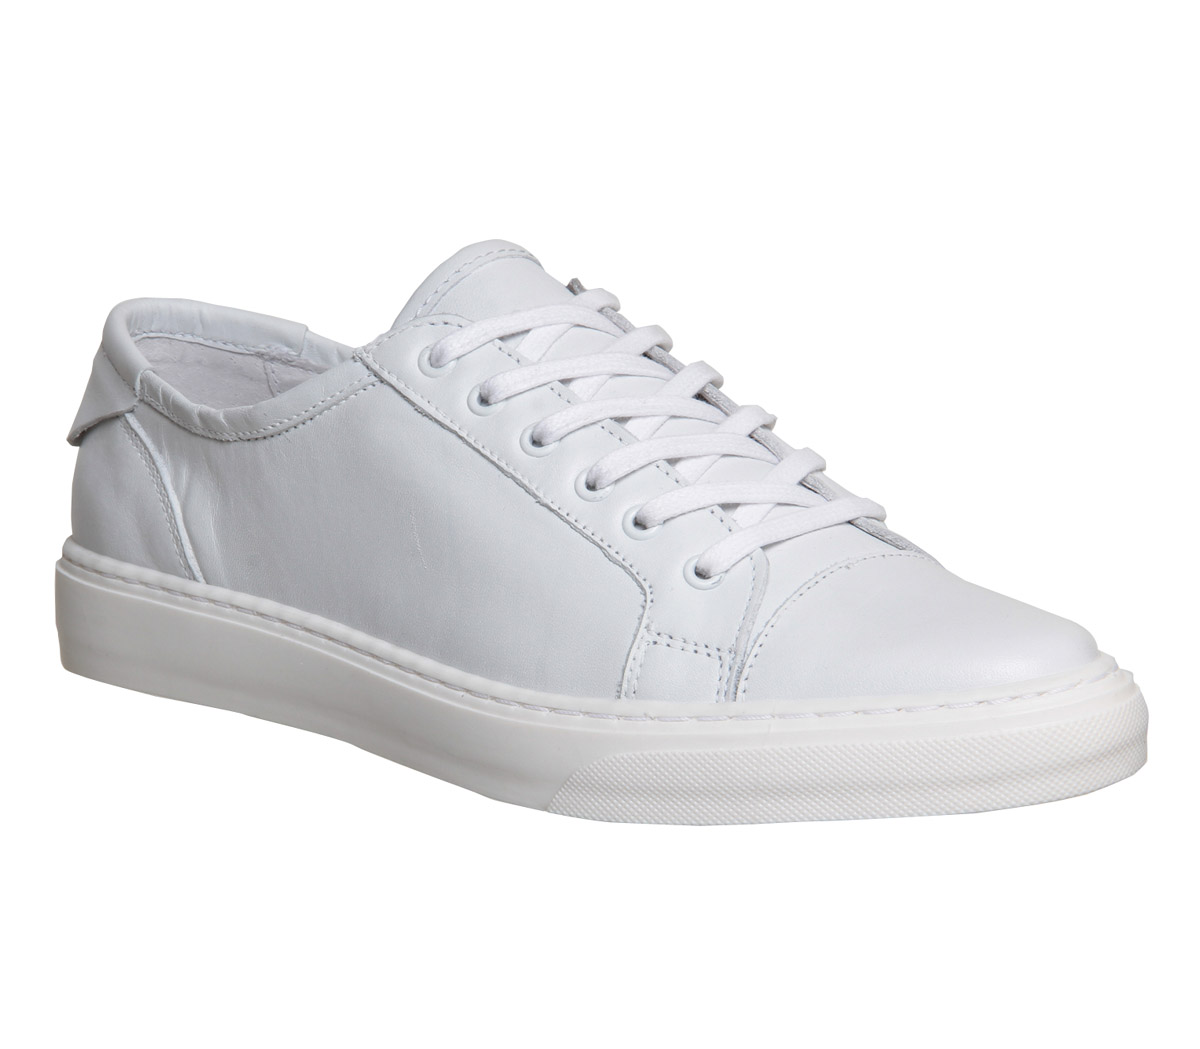 OFFICE Libra Point Lace Up Trainer White Leather - Flat Shoes for Women